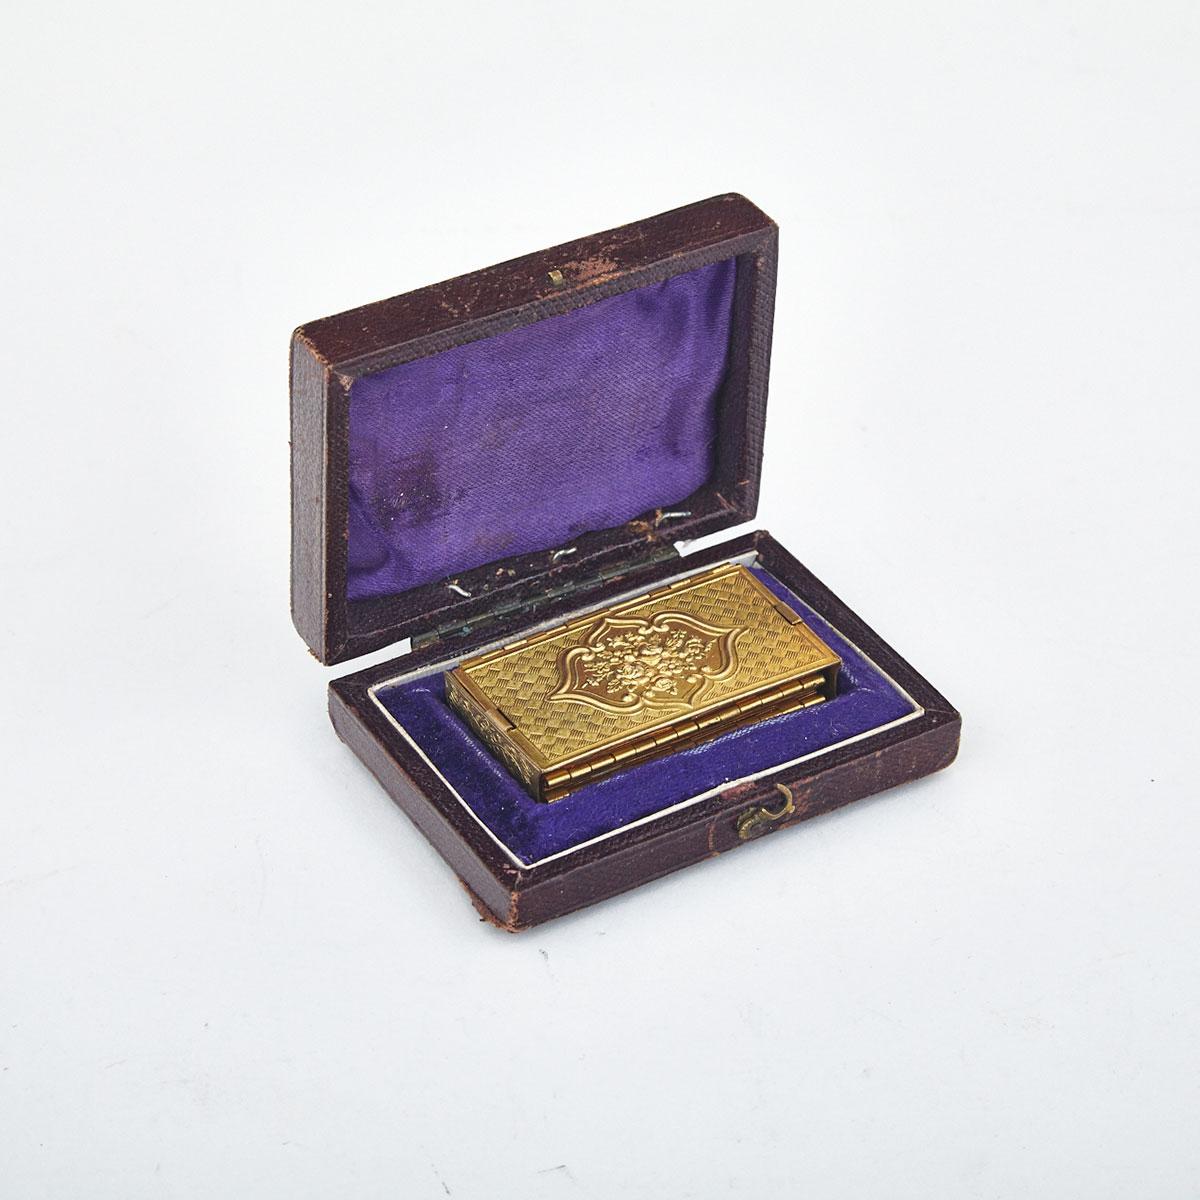 W. Avery & Son ‘Beatrice Patent’ Gilt Brass Book Form Needle Case, 2nd half, 19th century